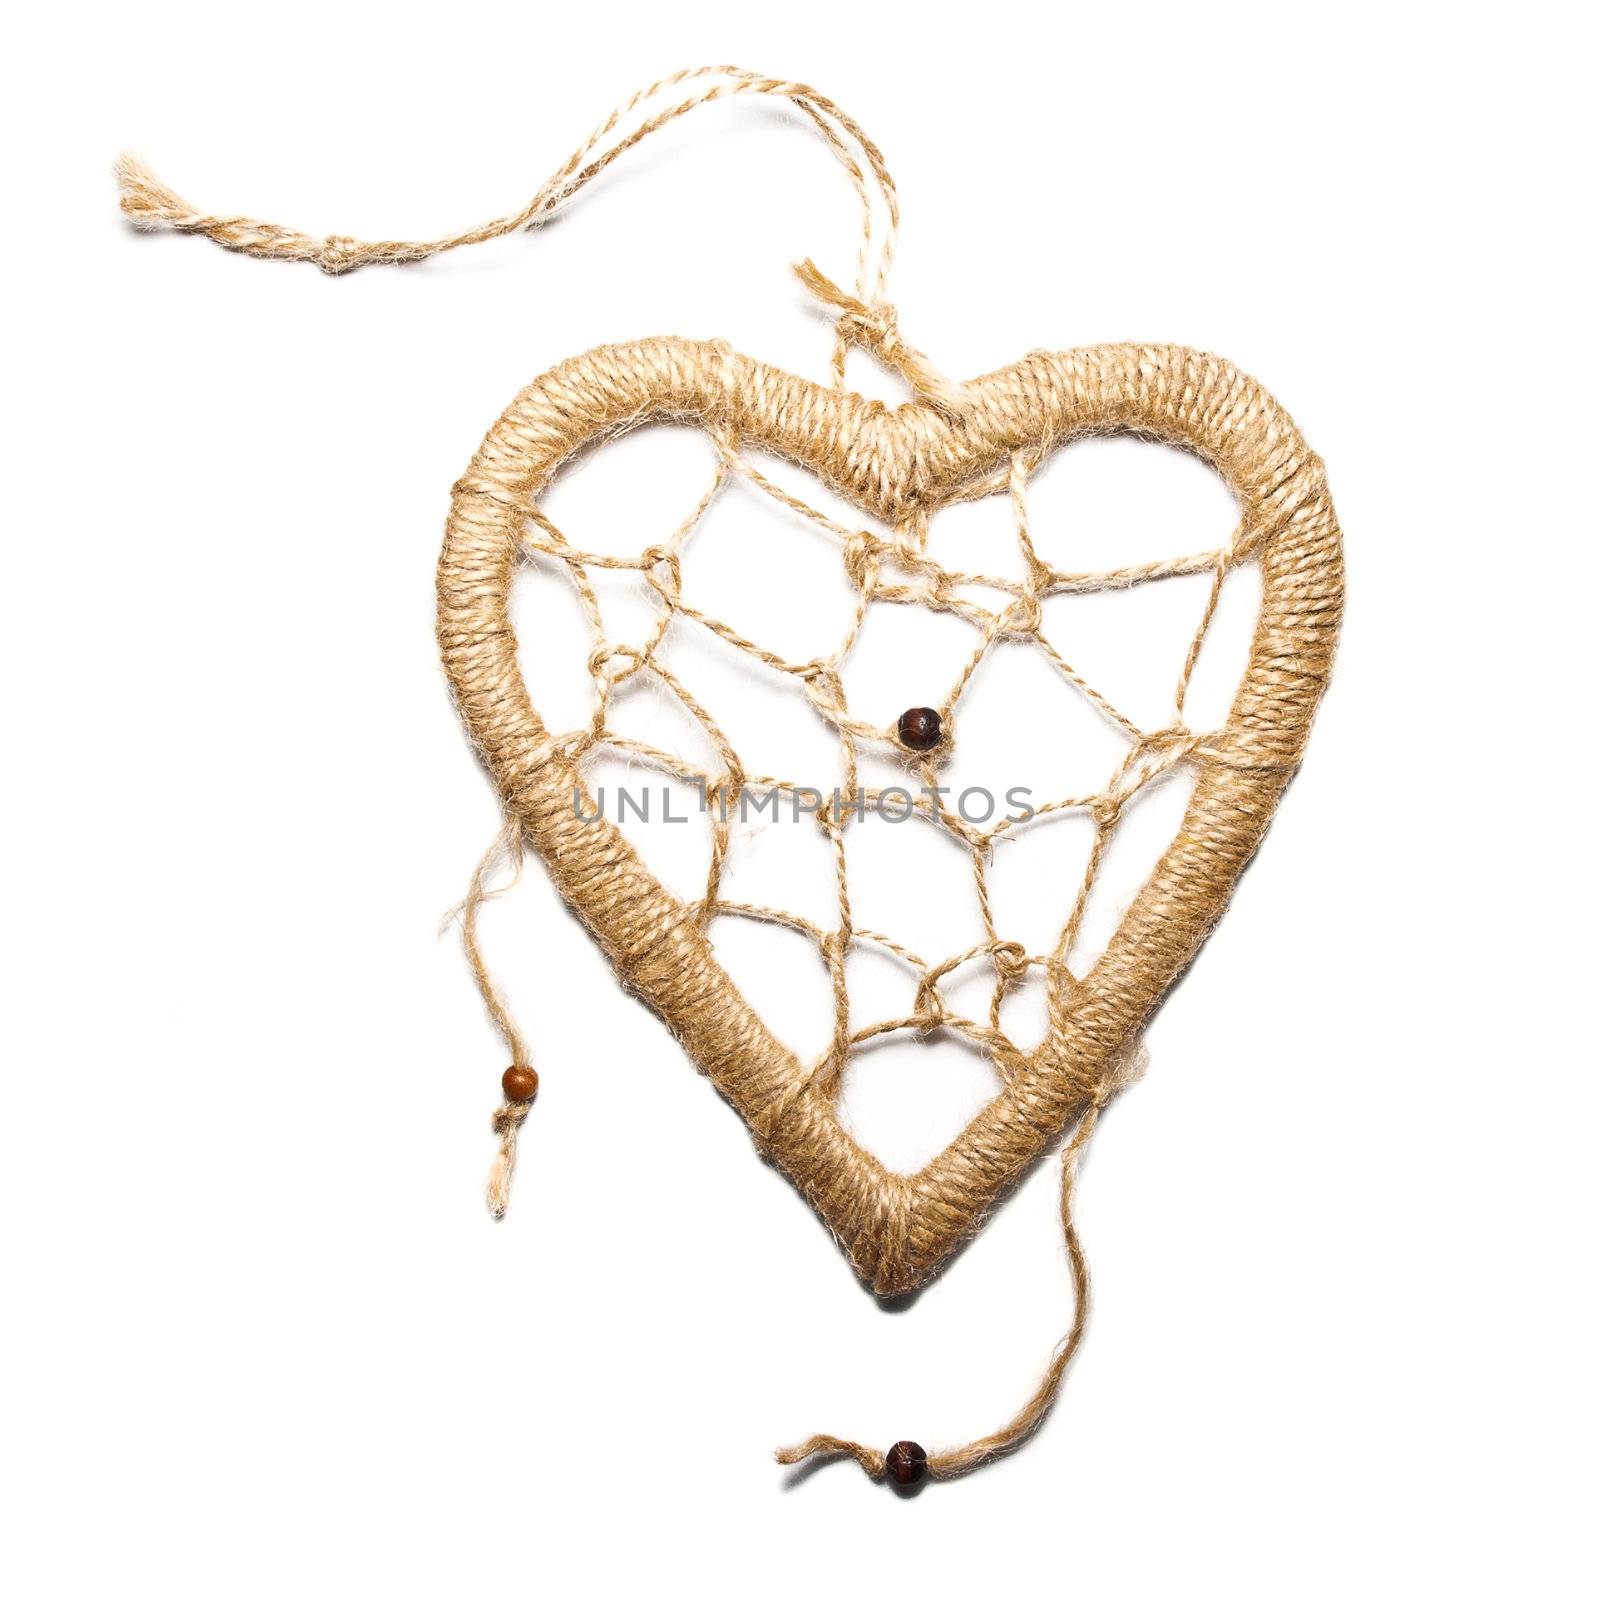 Rope heart on the white background.